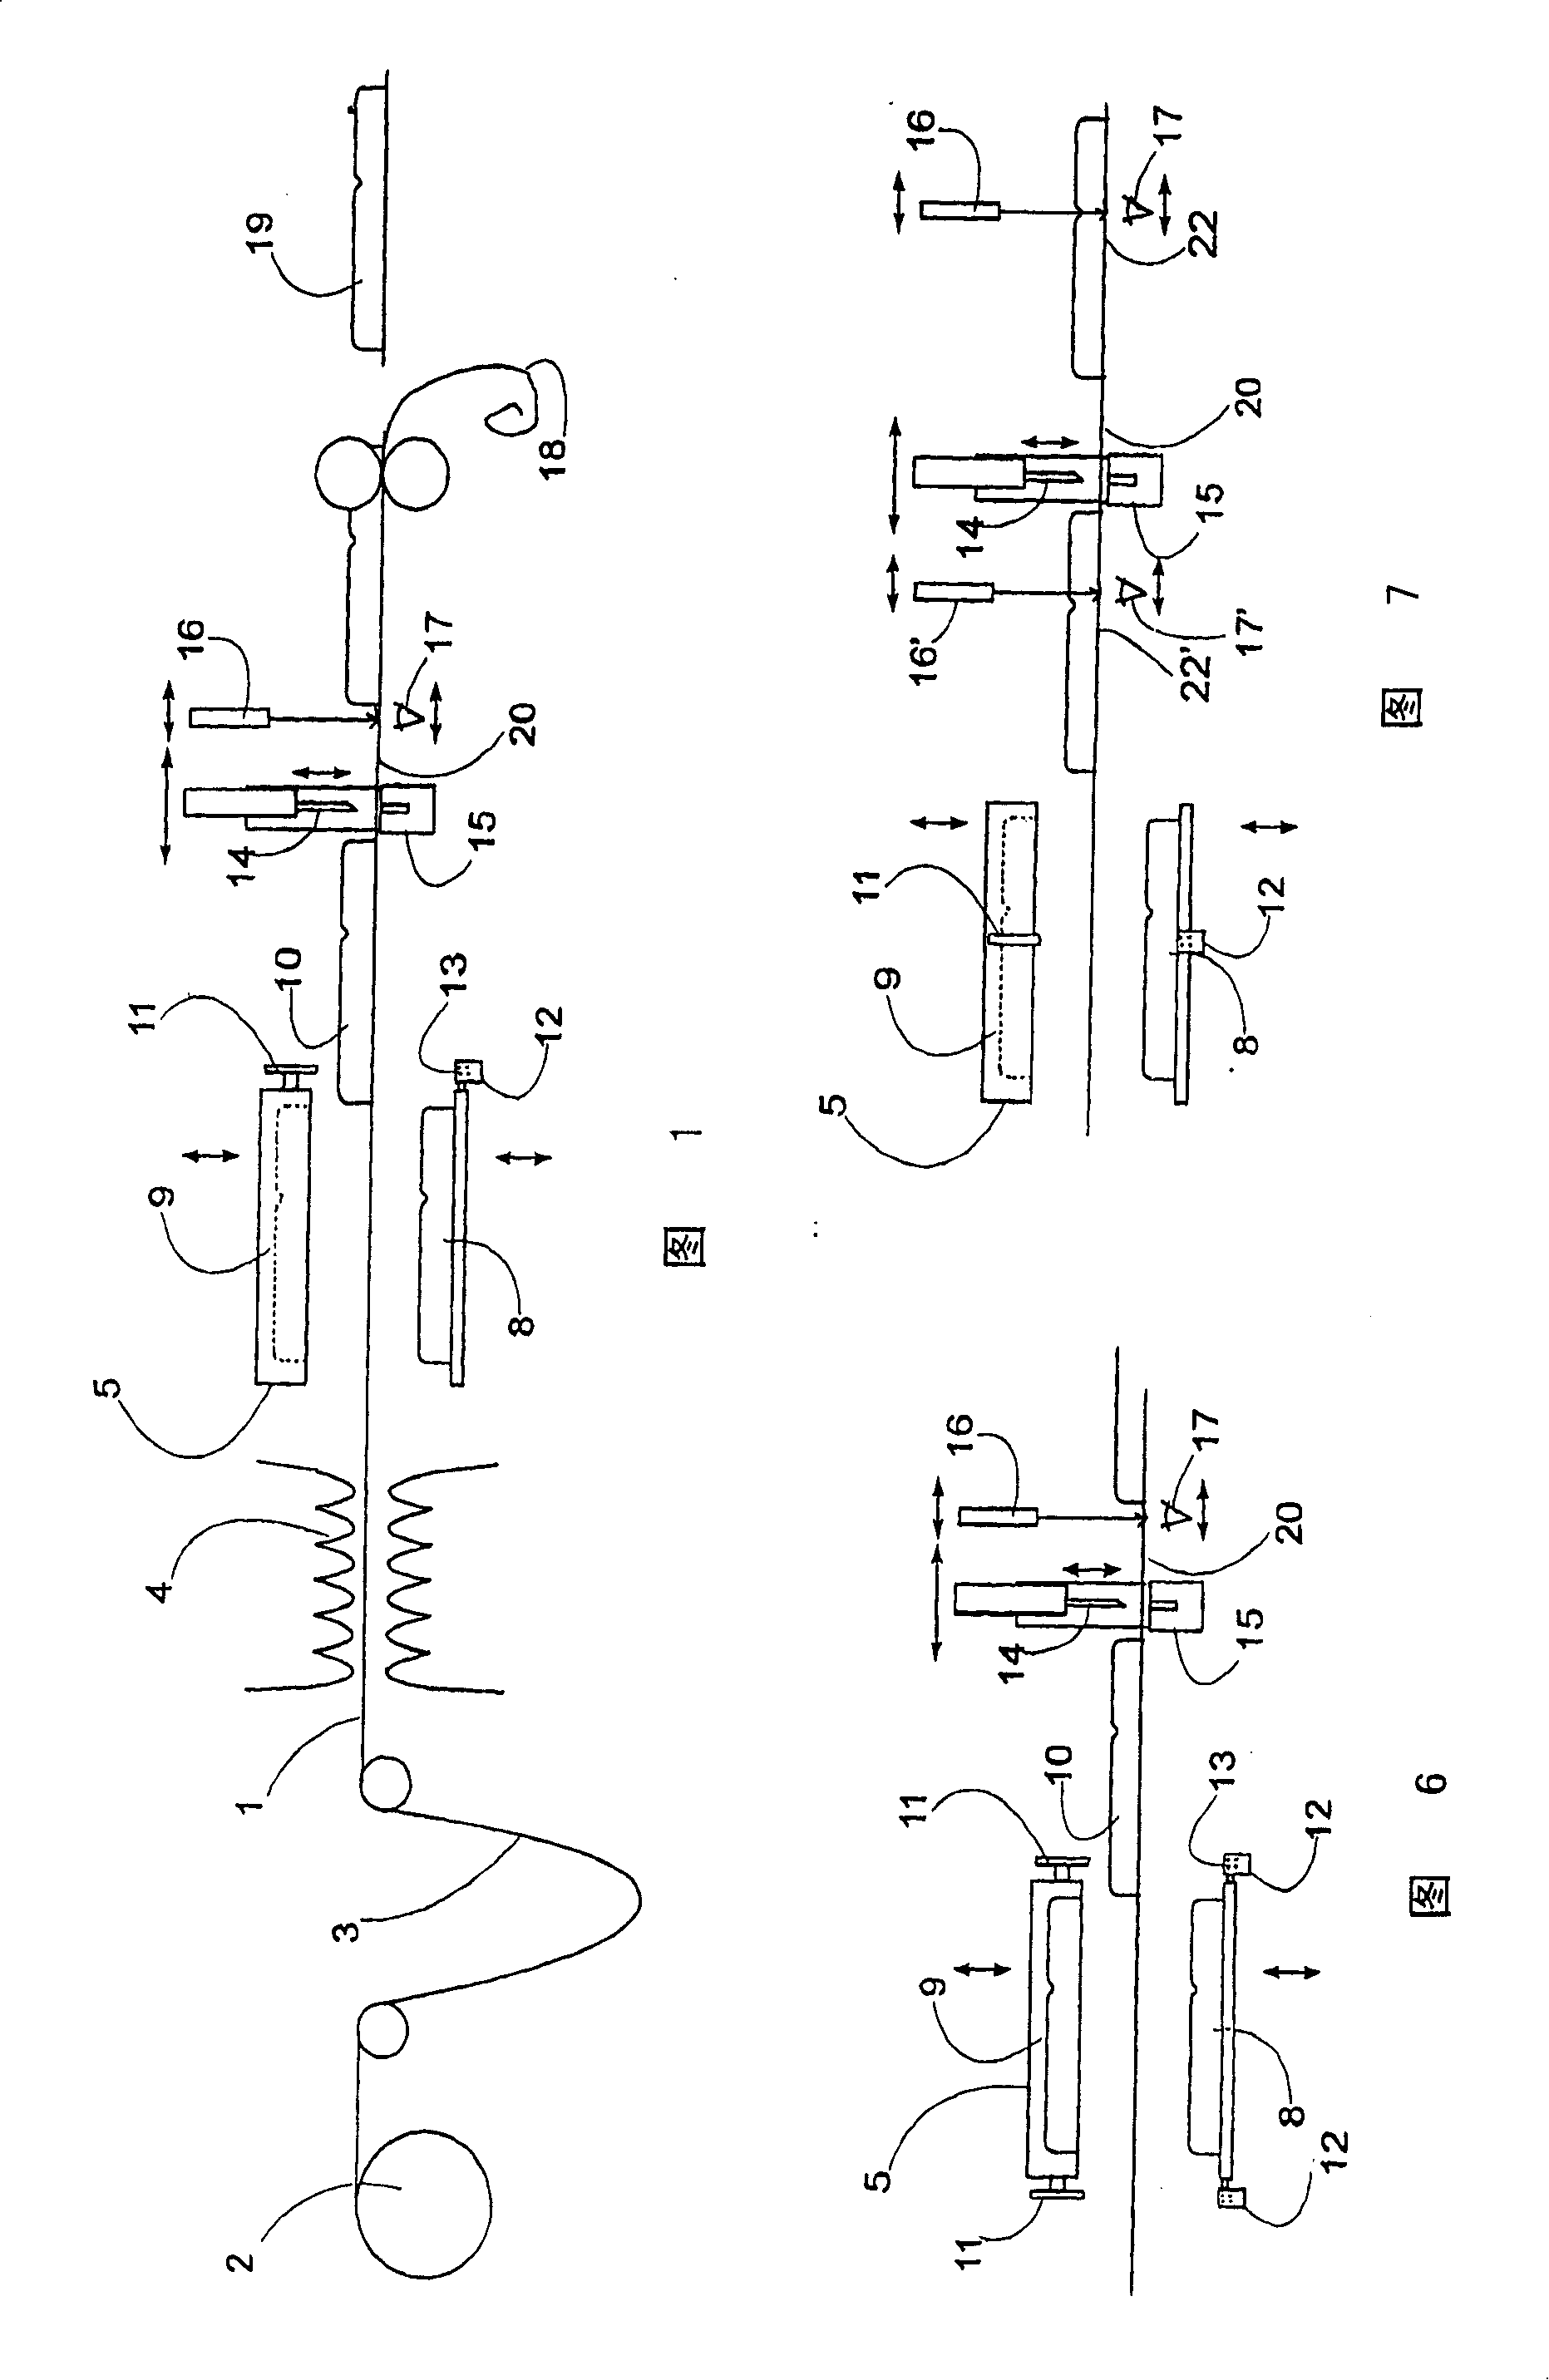 Method and device for forming objects from a material strand and for separating said objects